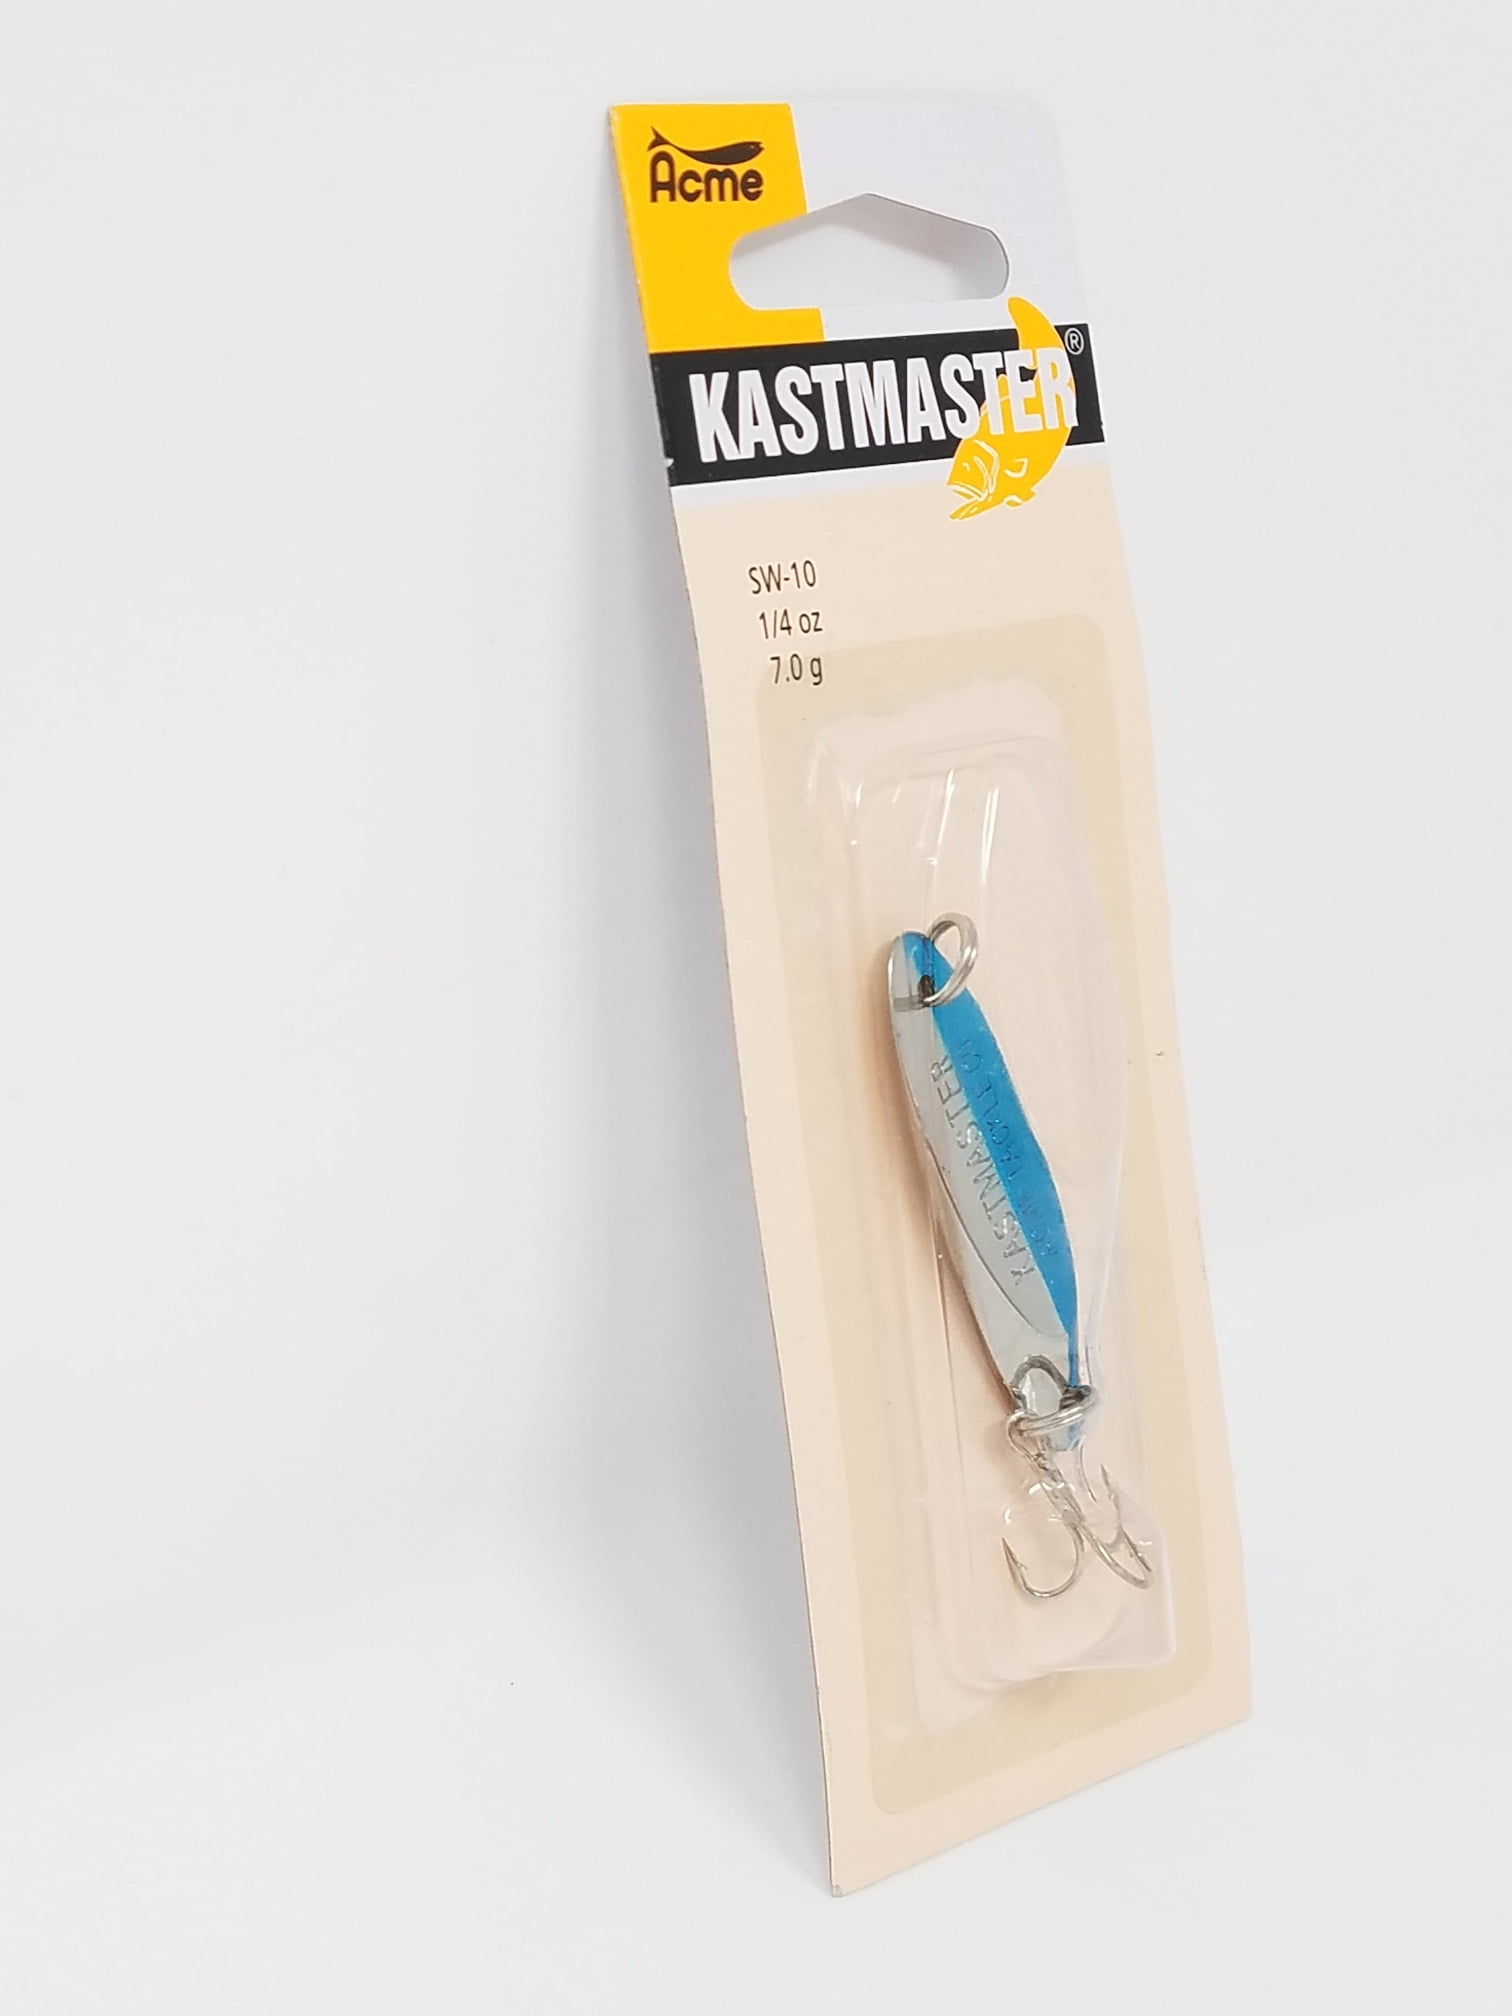 Acme Tackle Kastmaster Fishing Lure Spoon Chrome 1/4 oz. 